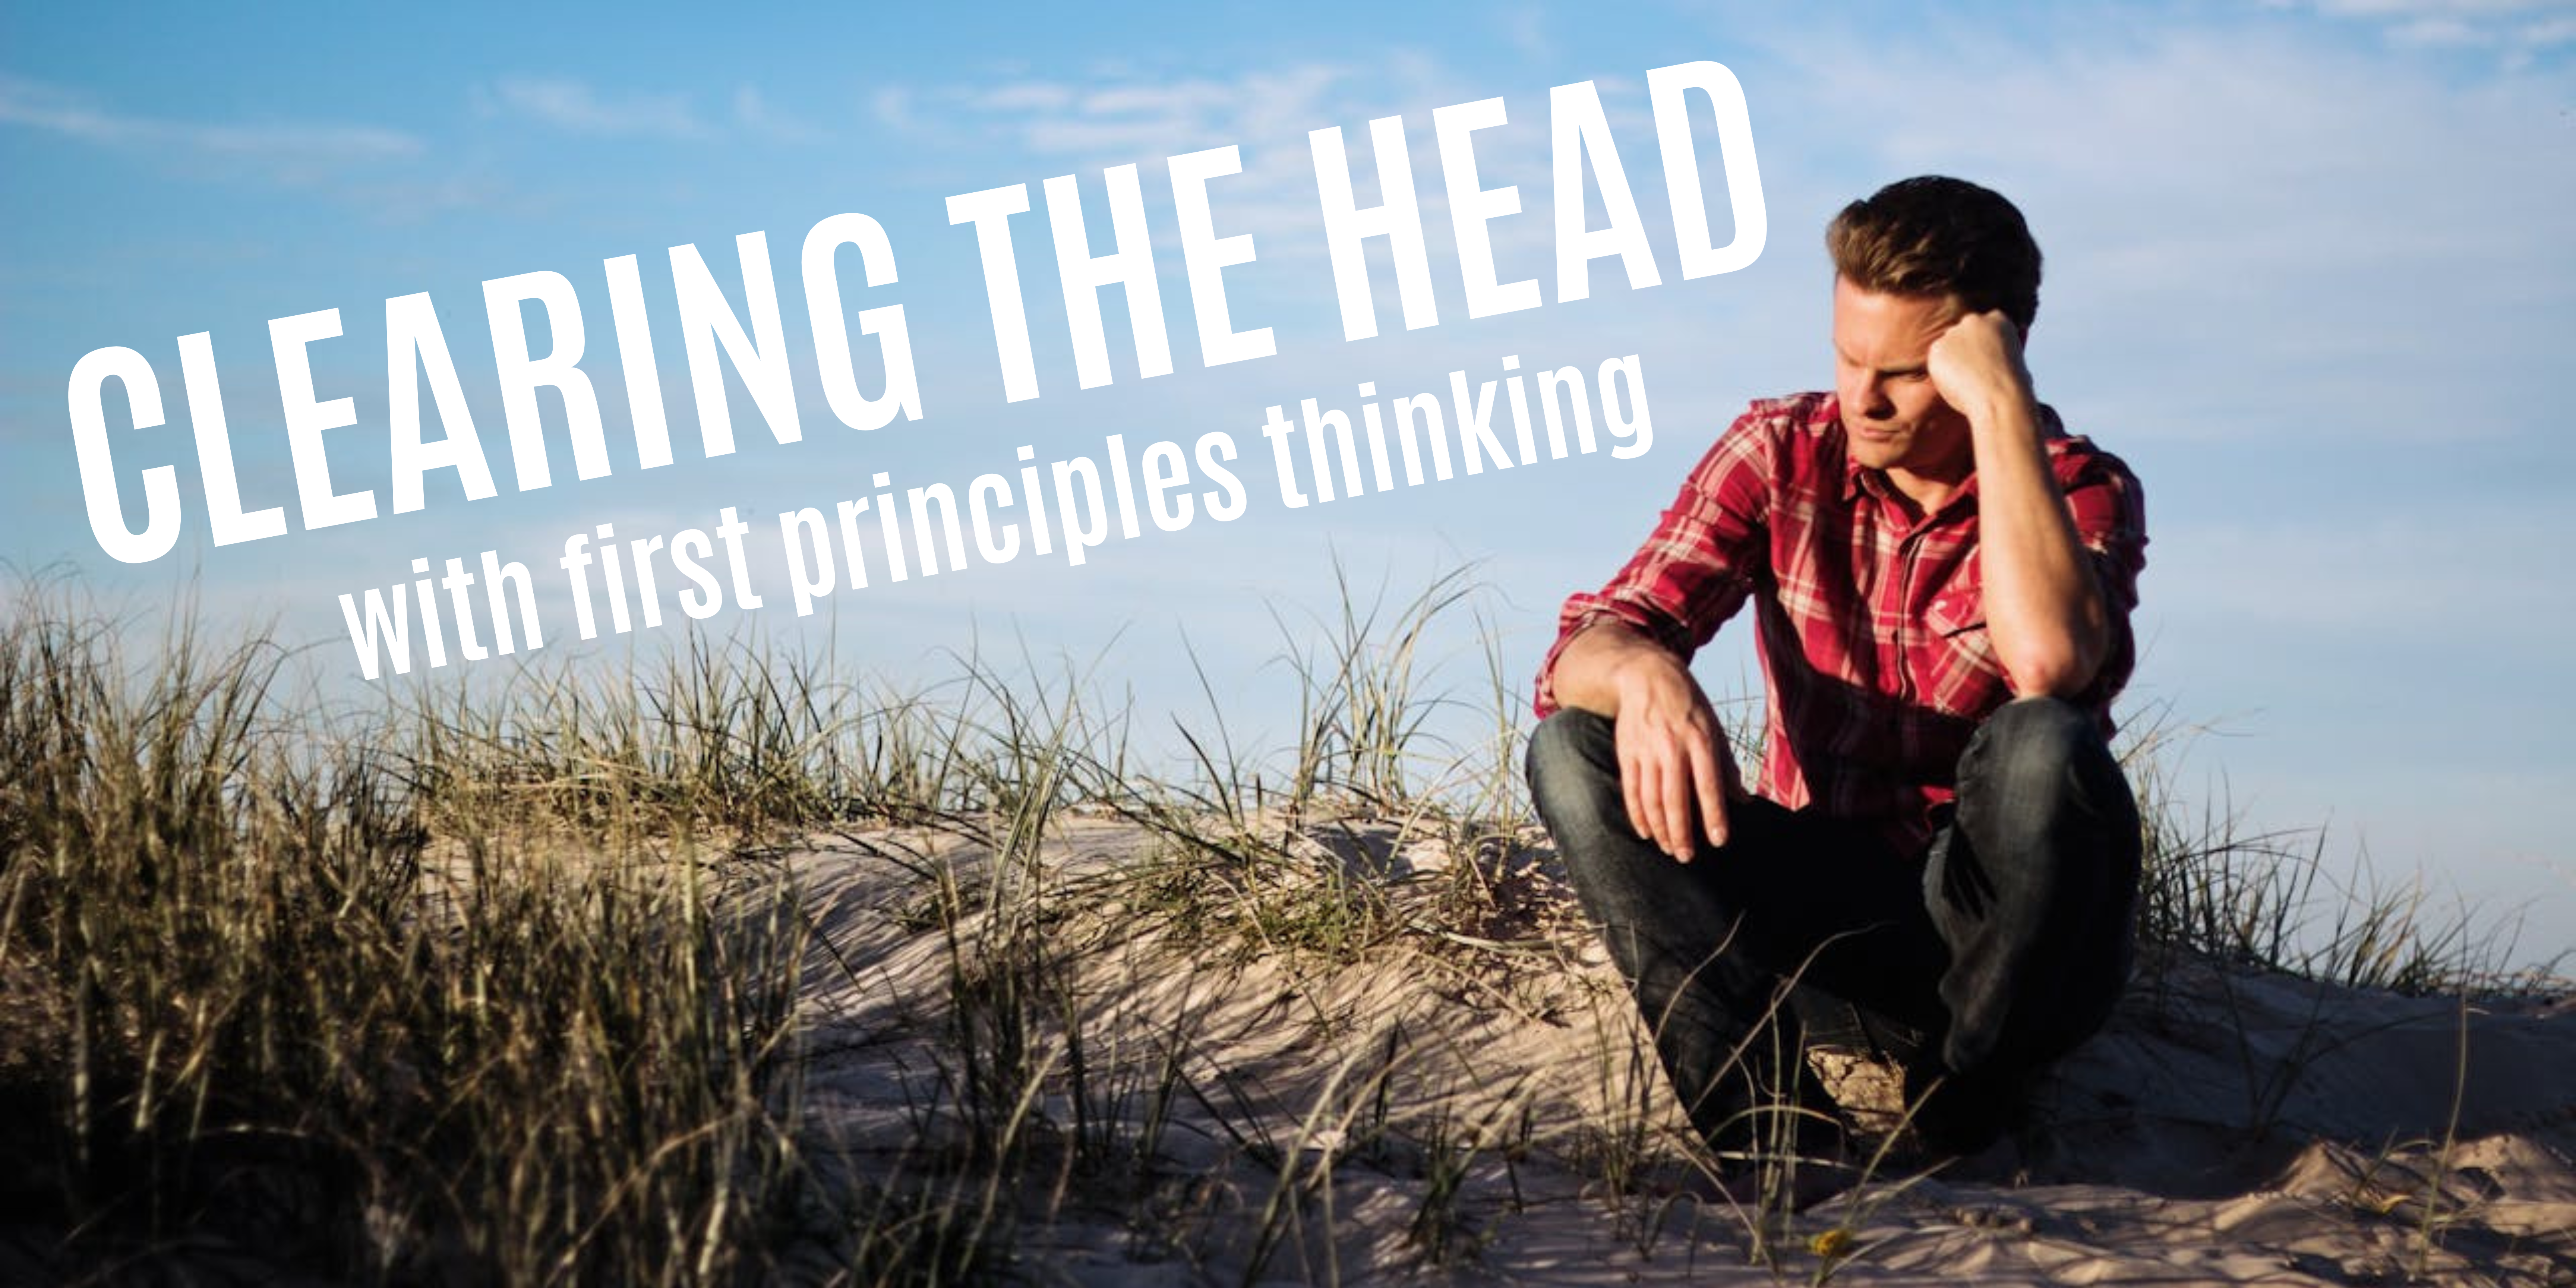 study abroad with first principles thinking